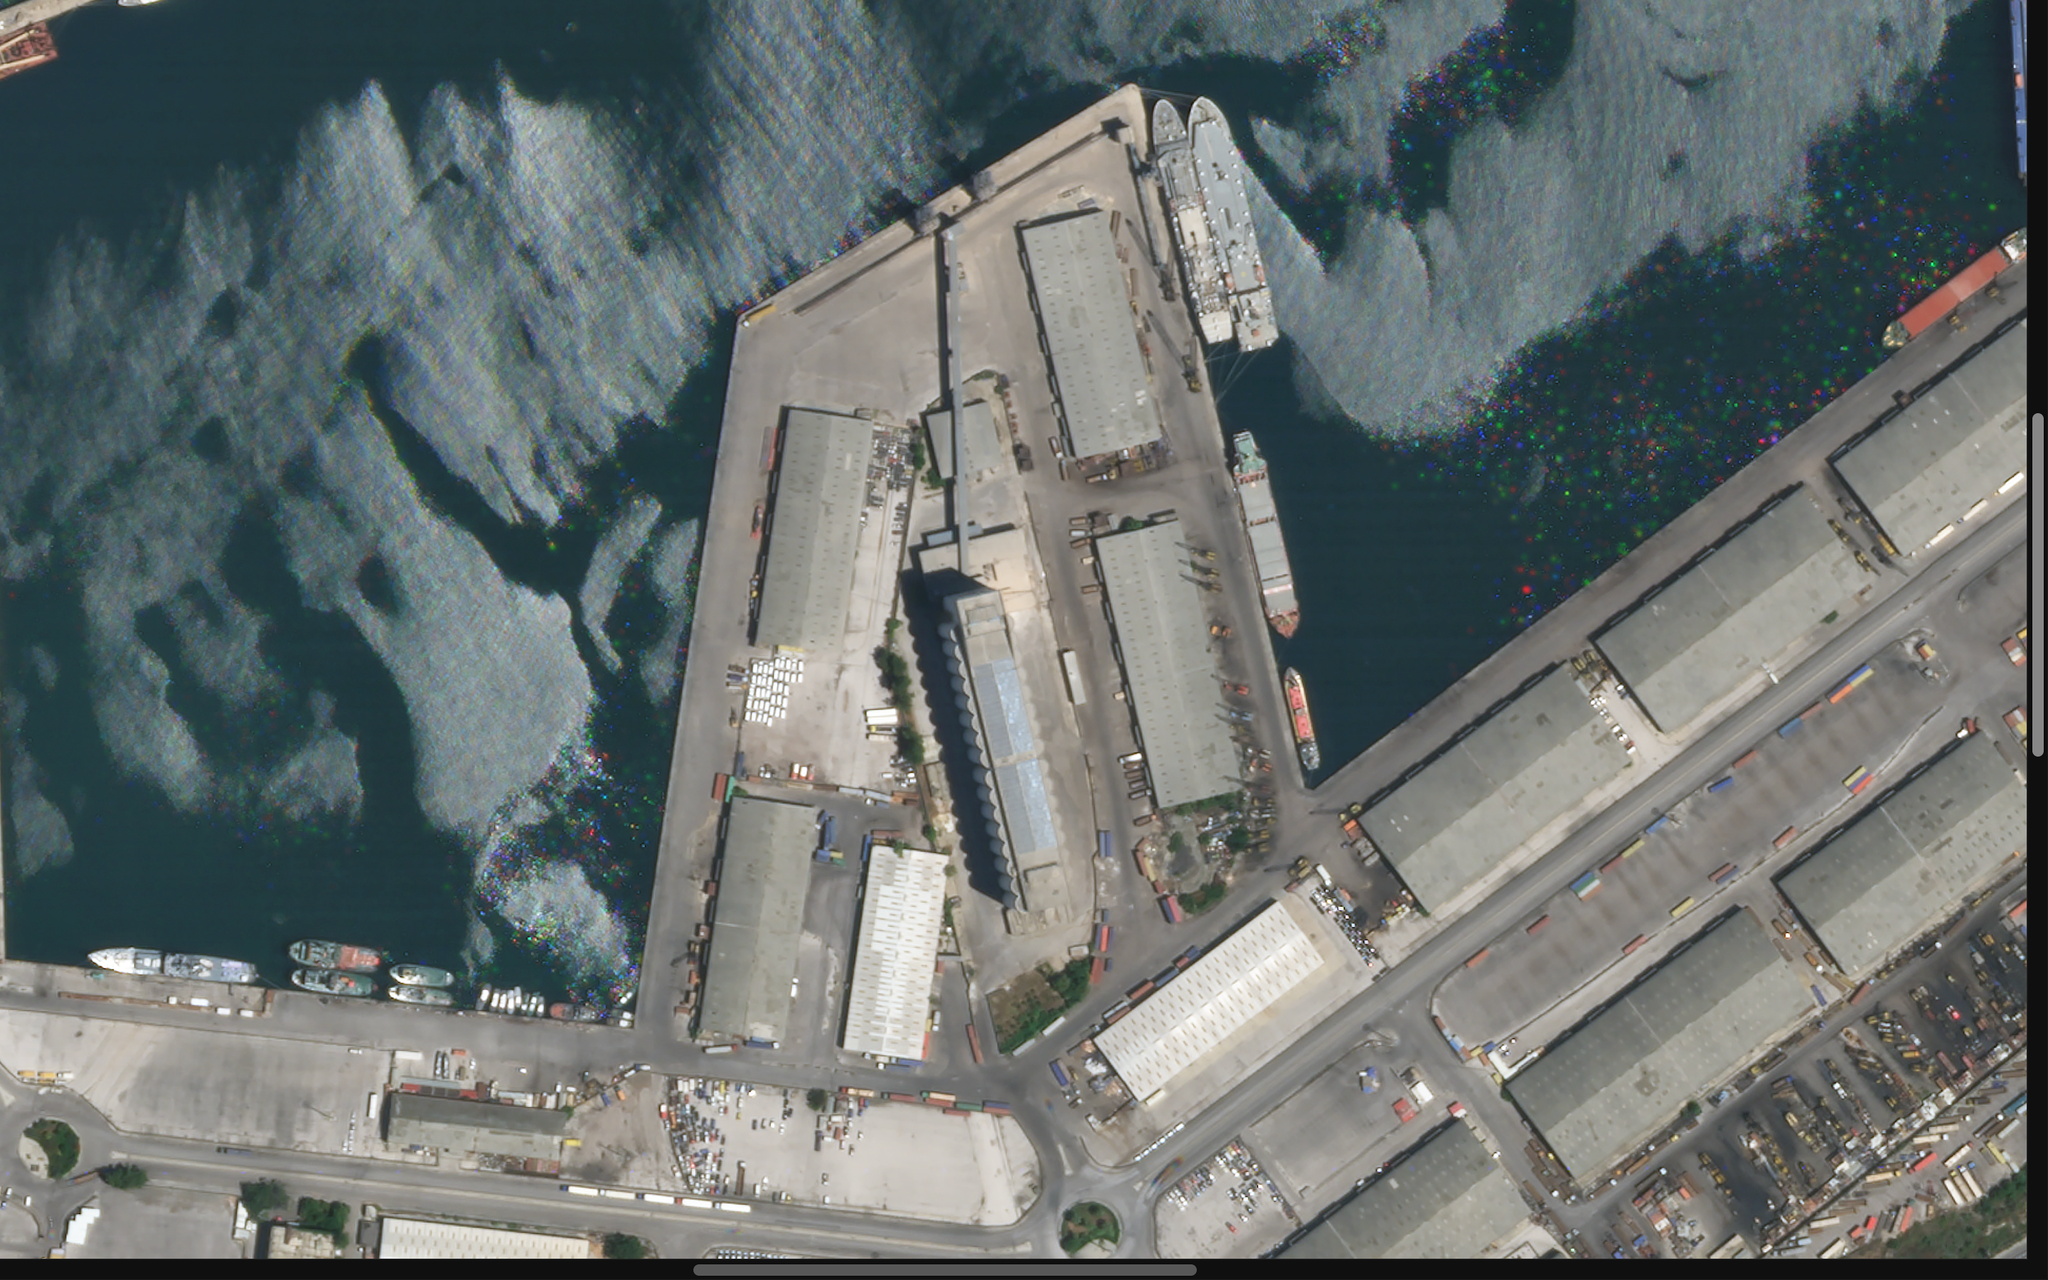 Satellite images May 31. Planet Labs, Inc., Before explosion (Beirut)